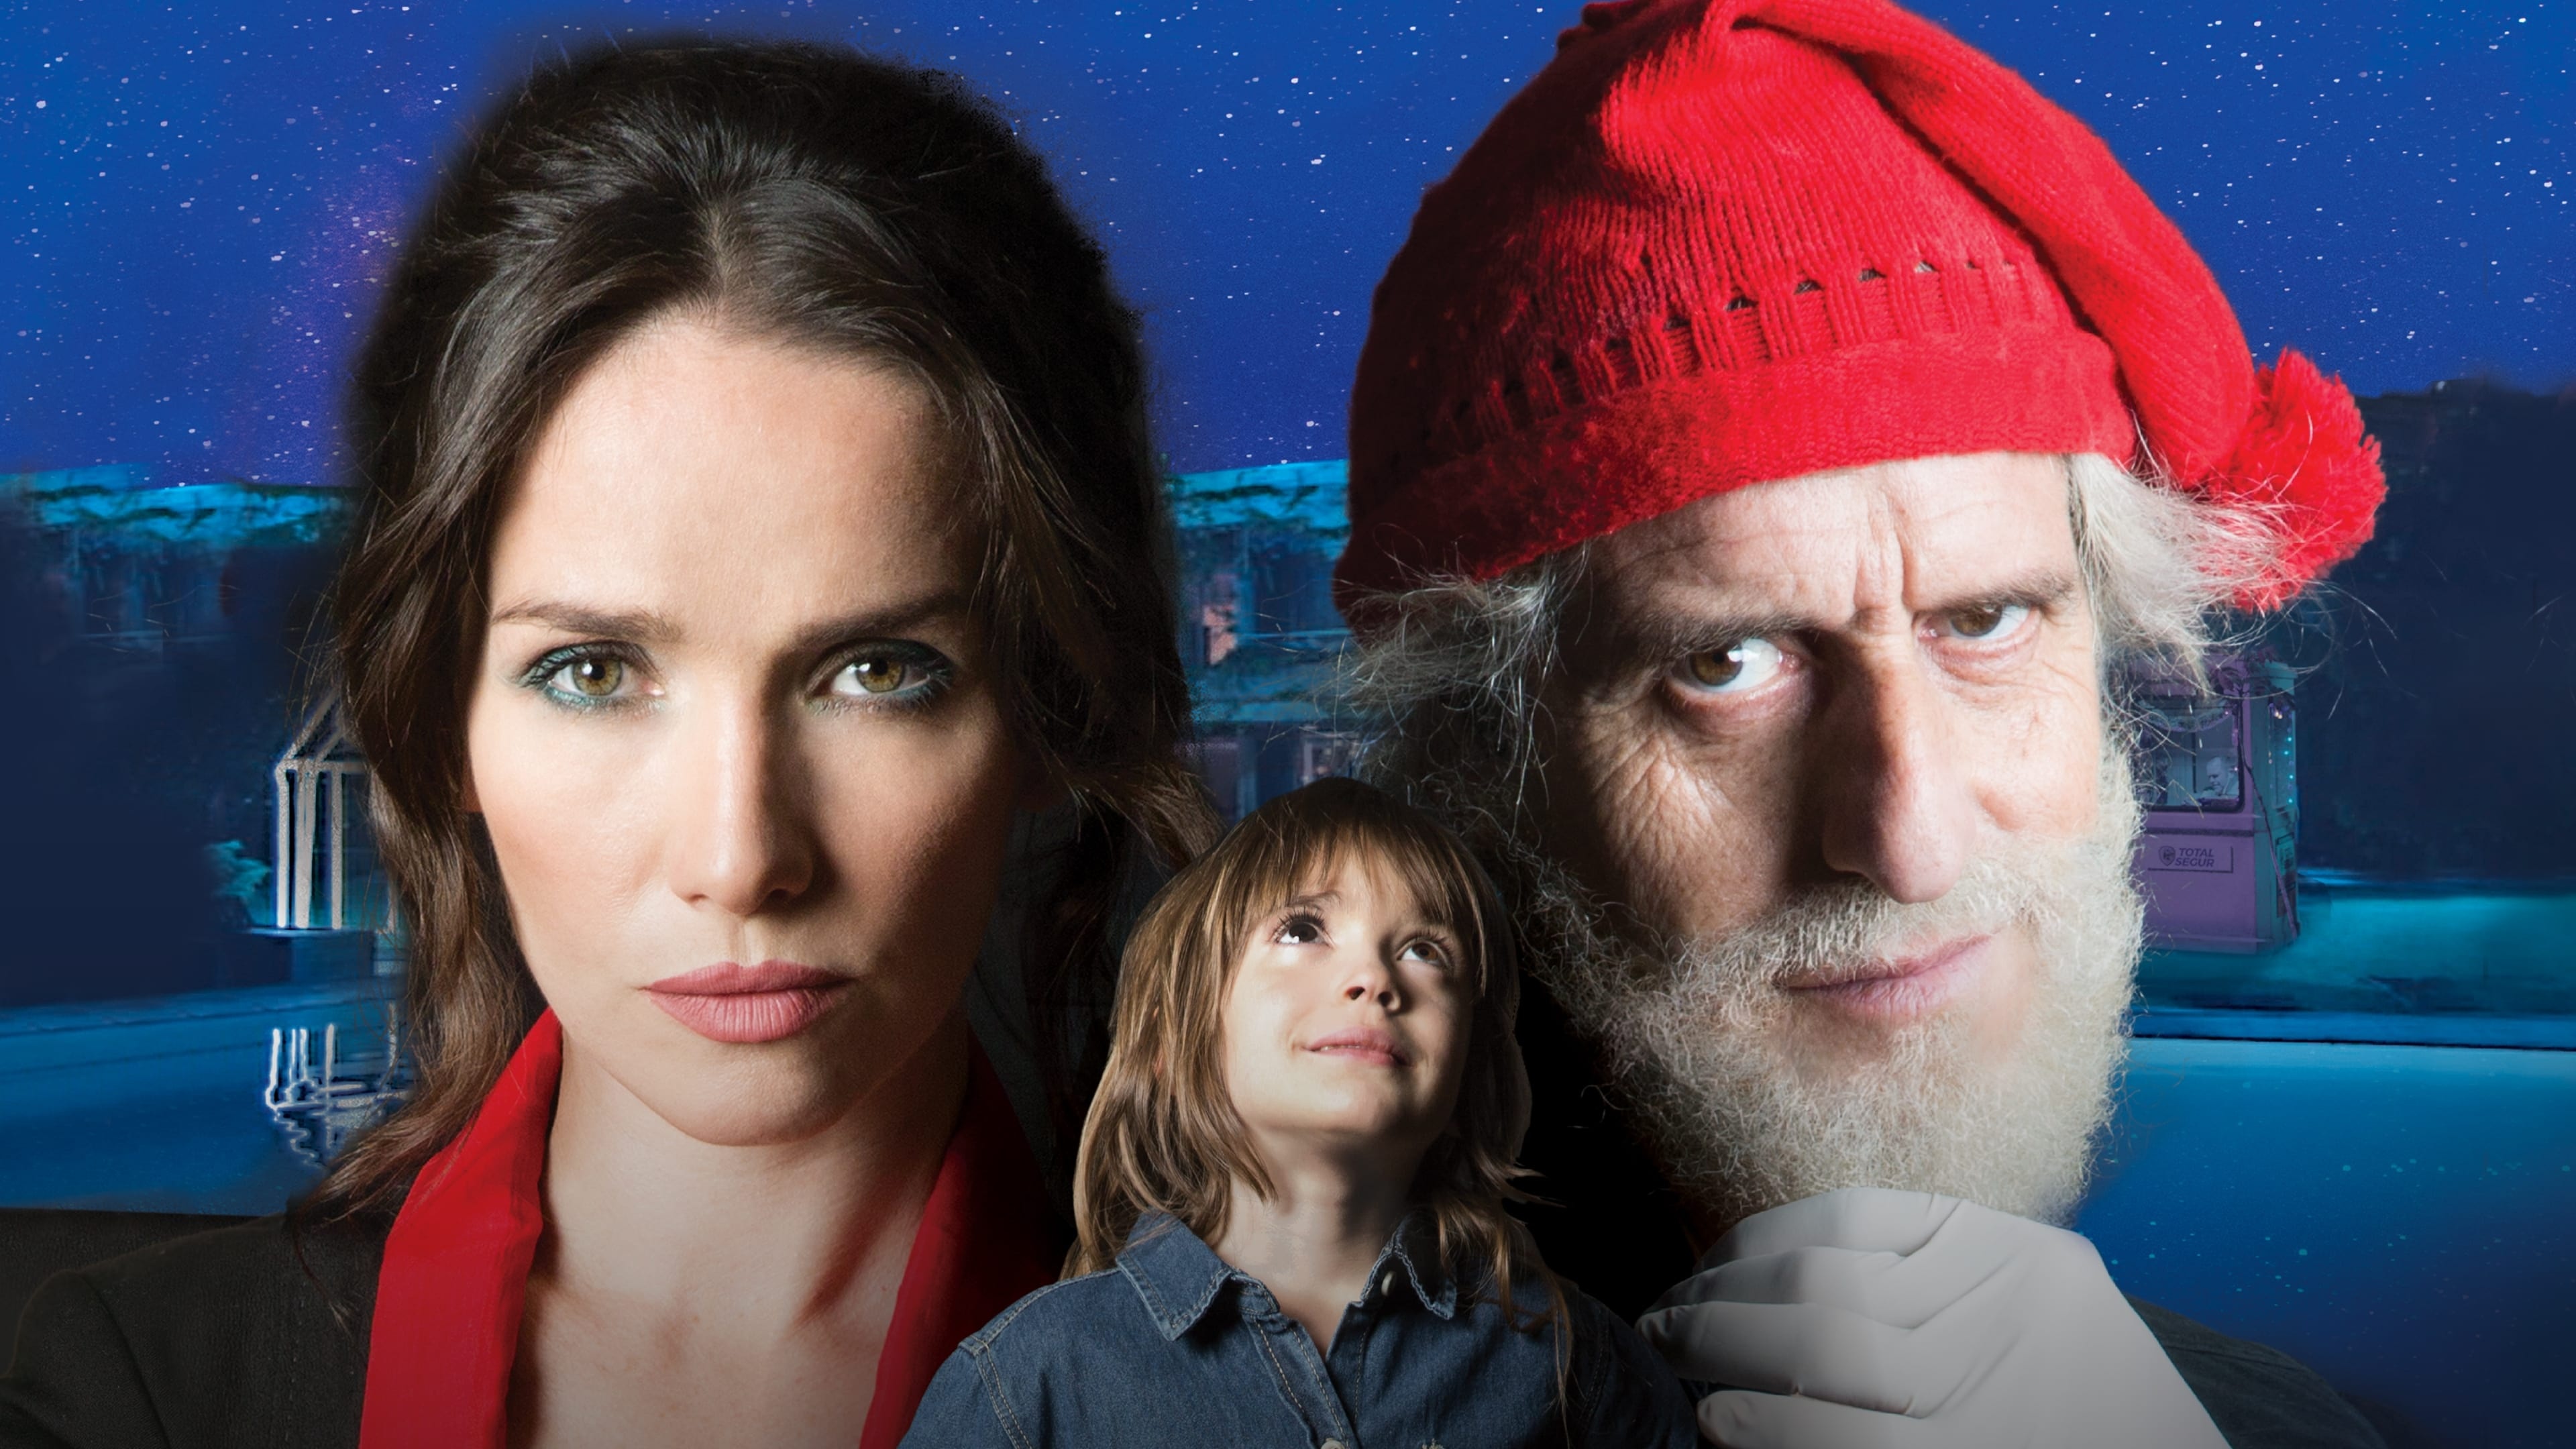 Watch Bad Christmas, Streaming for free, Soap2day, 3840x2160 4K Desktop